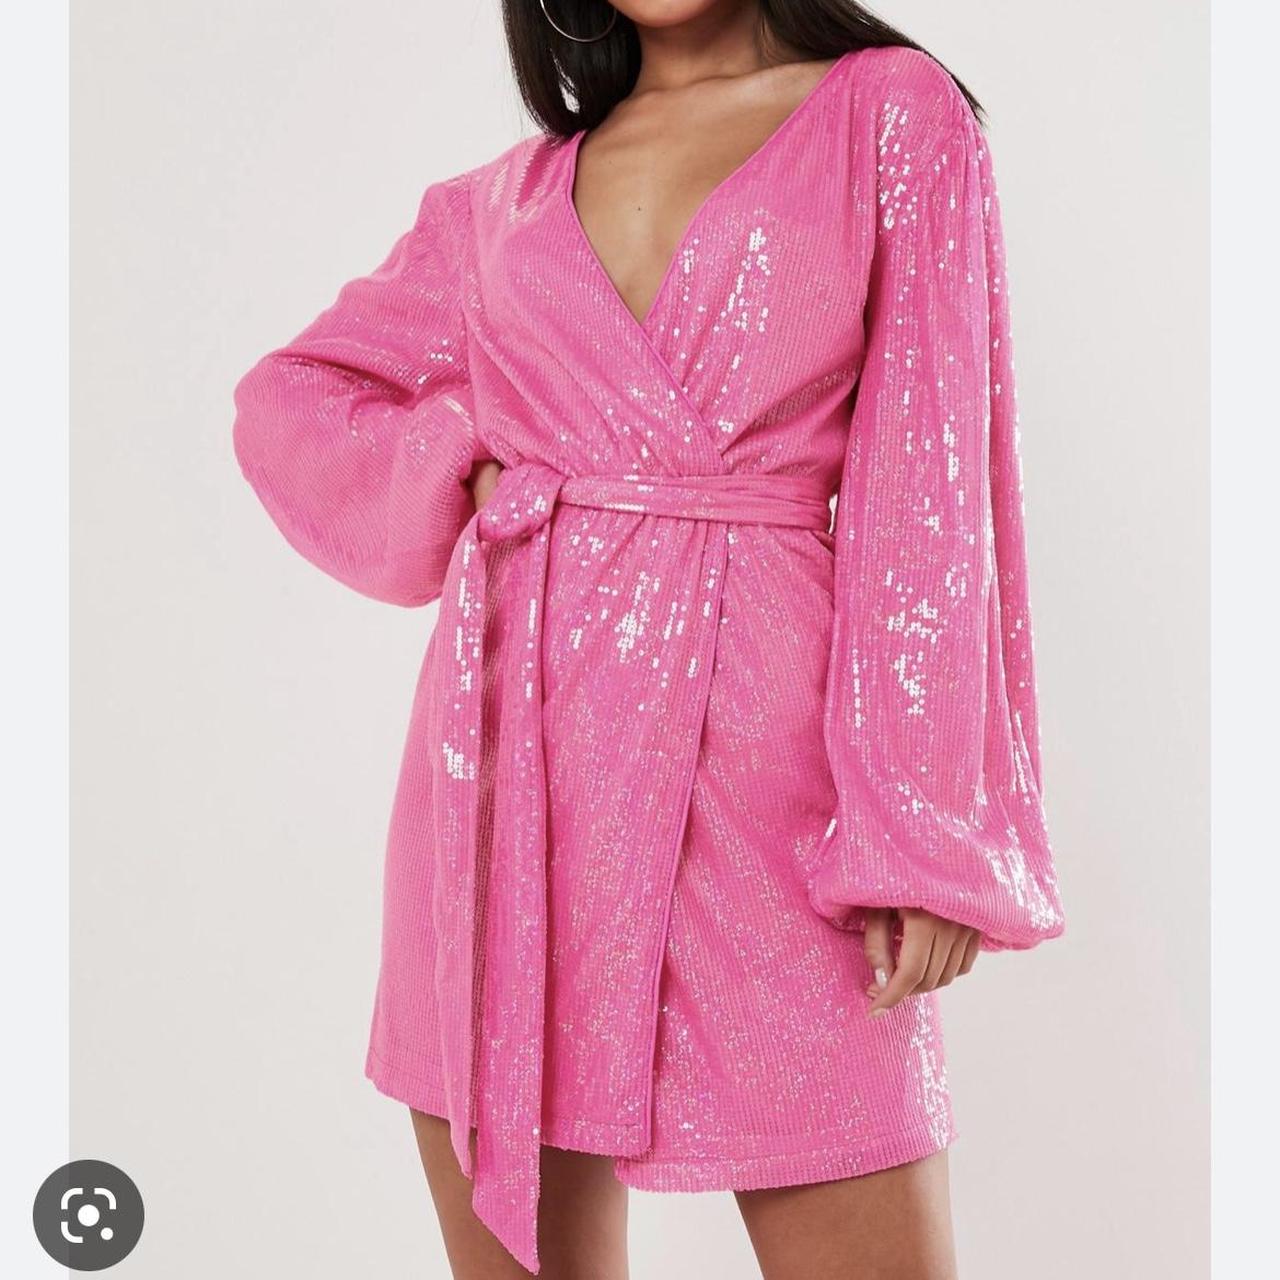 Pink sparkly Missguided dress - SO fun! - Depop